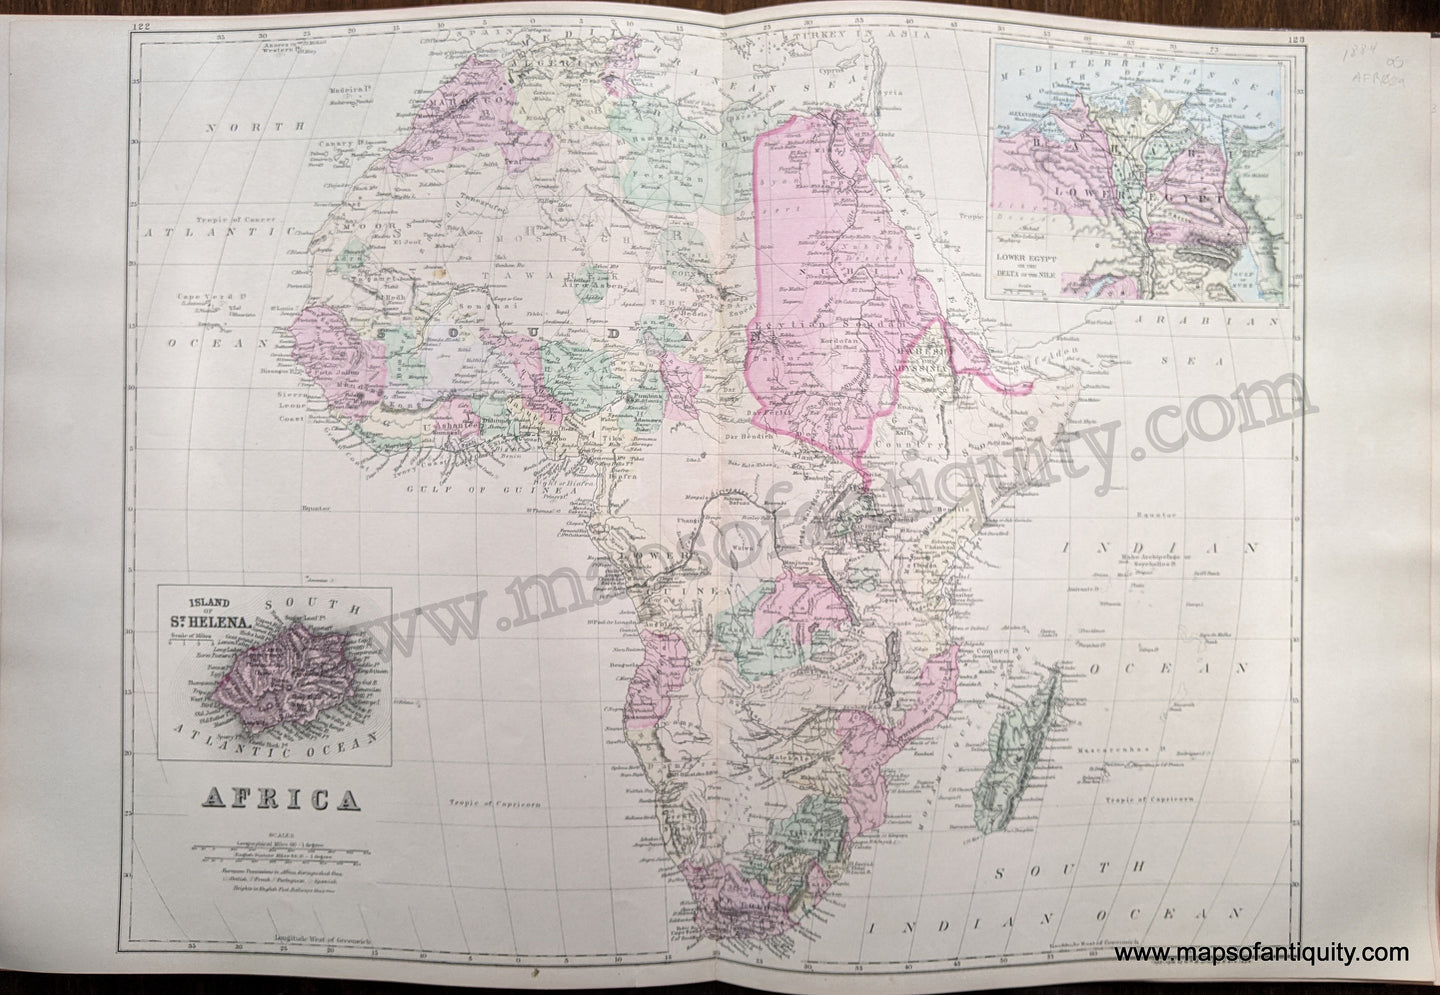 Antique-Hand-Colored-Map-Africa-Africa-Africa-General-1884-Mitchell-Maps-Of-Antiquity-1800s-19th-century